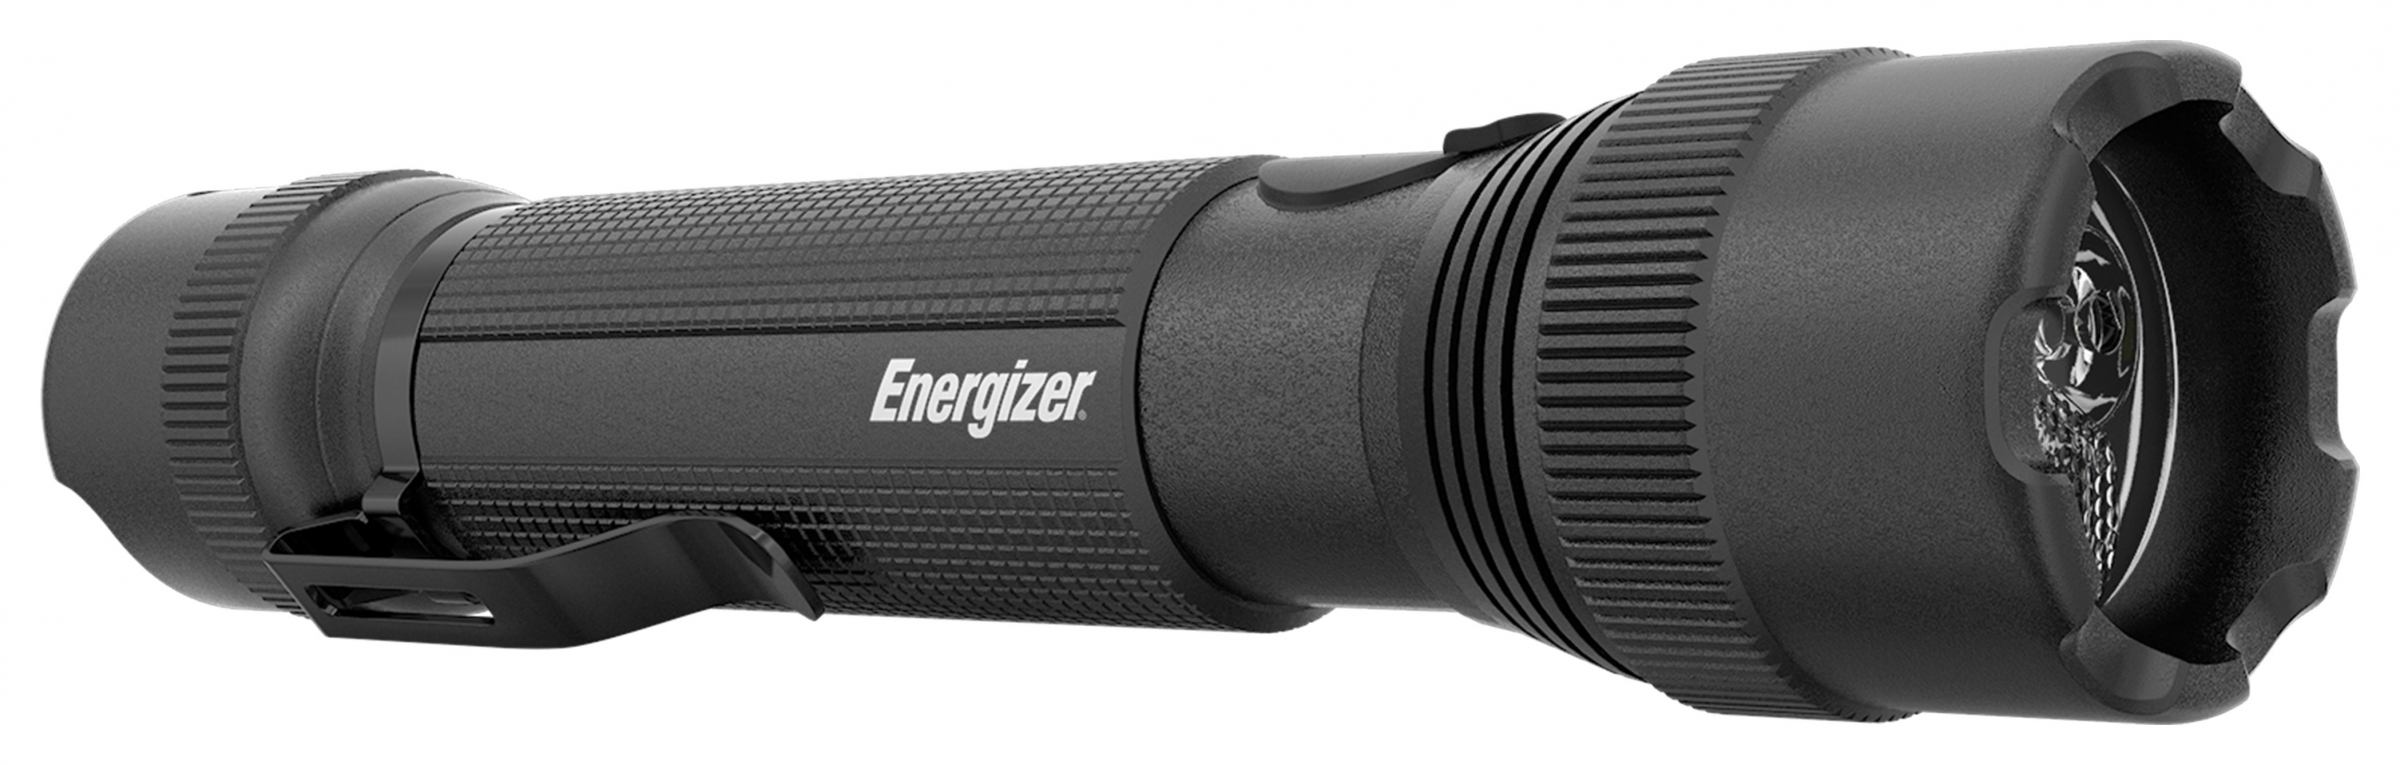 Energizer Tactical TAC-R700 Rechargeable incl. Battery